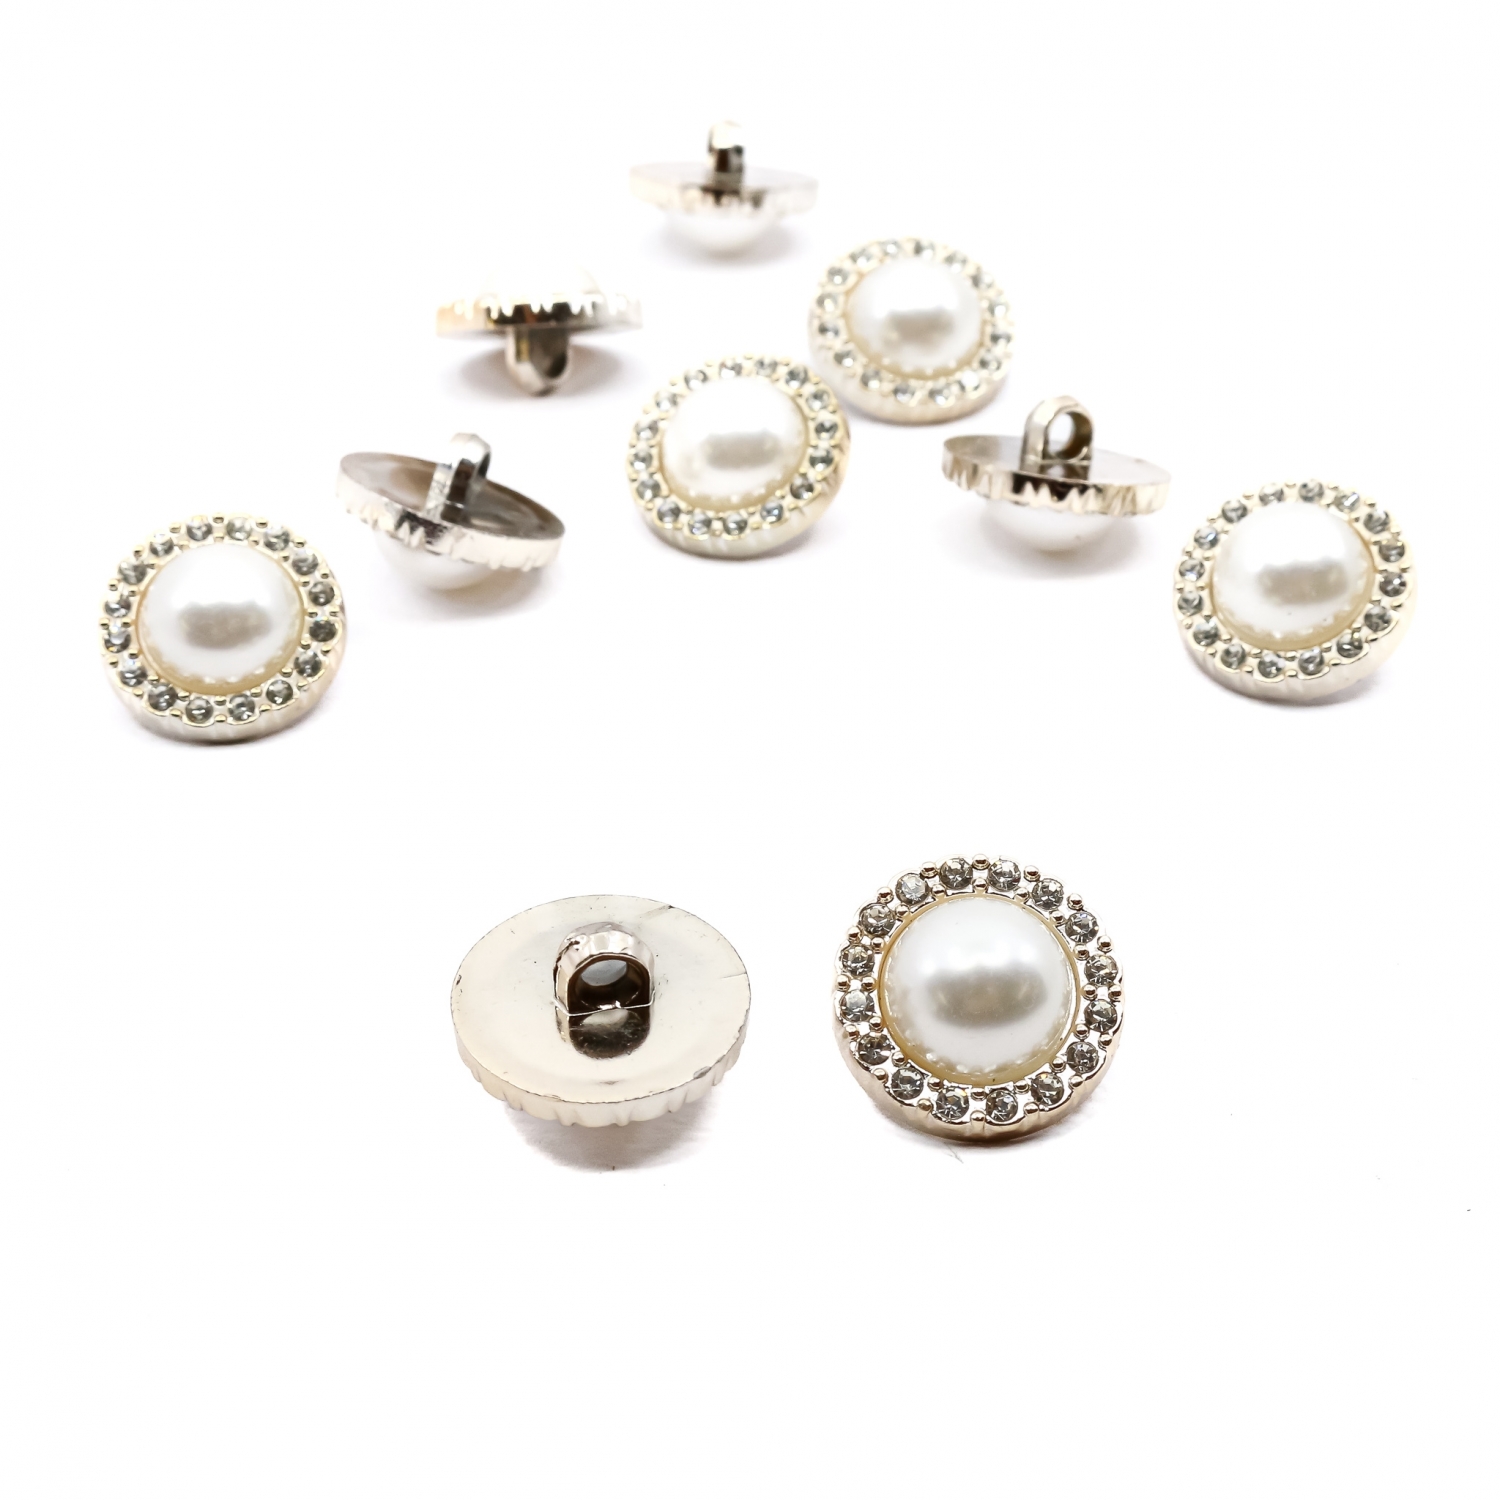 Pearl and Rhinestones Shank Buttons, 18 mm (100 pcs/pack) Code: 809/28